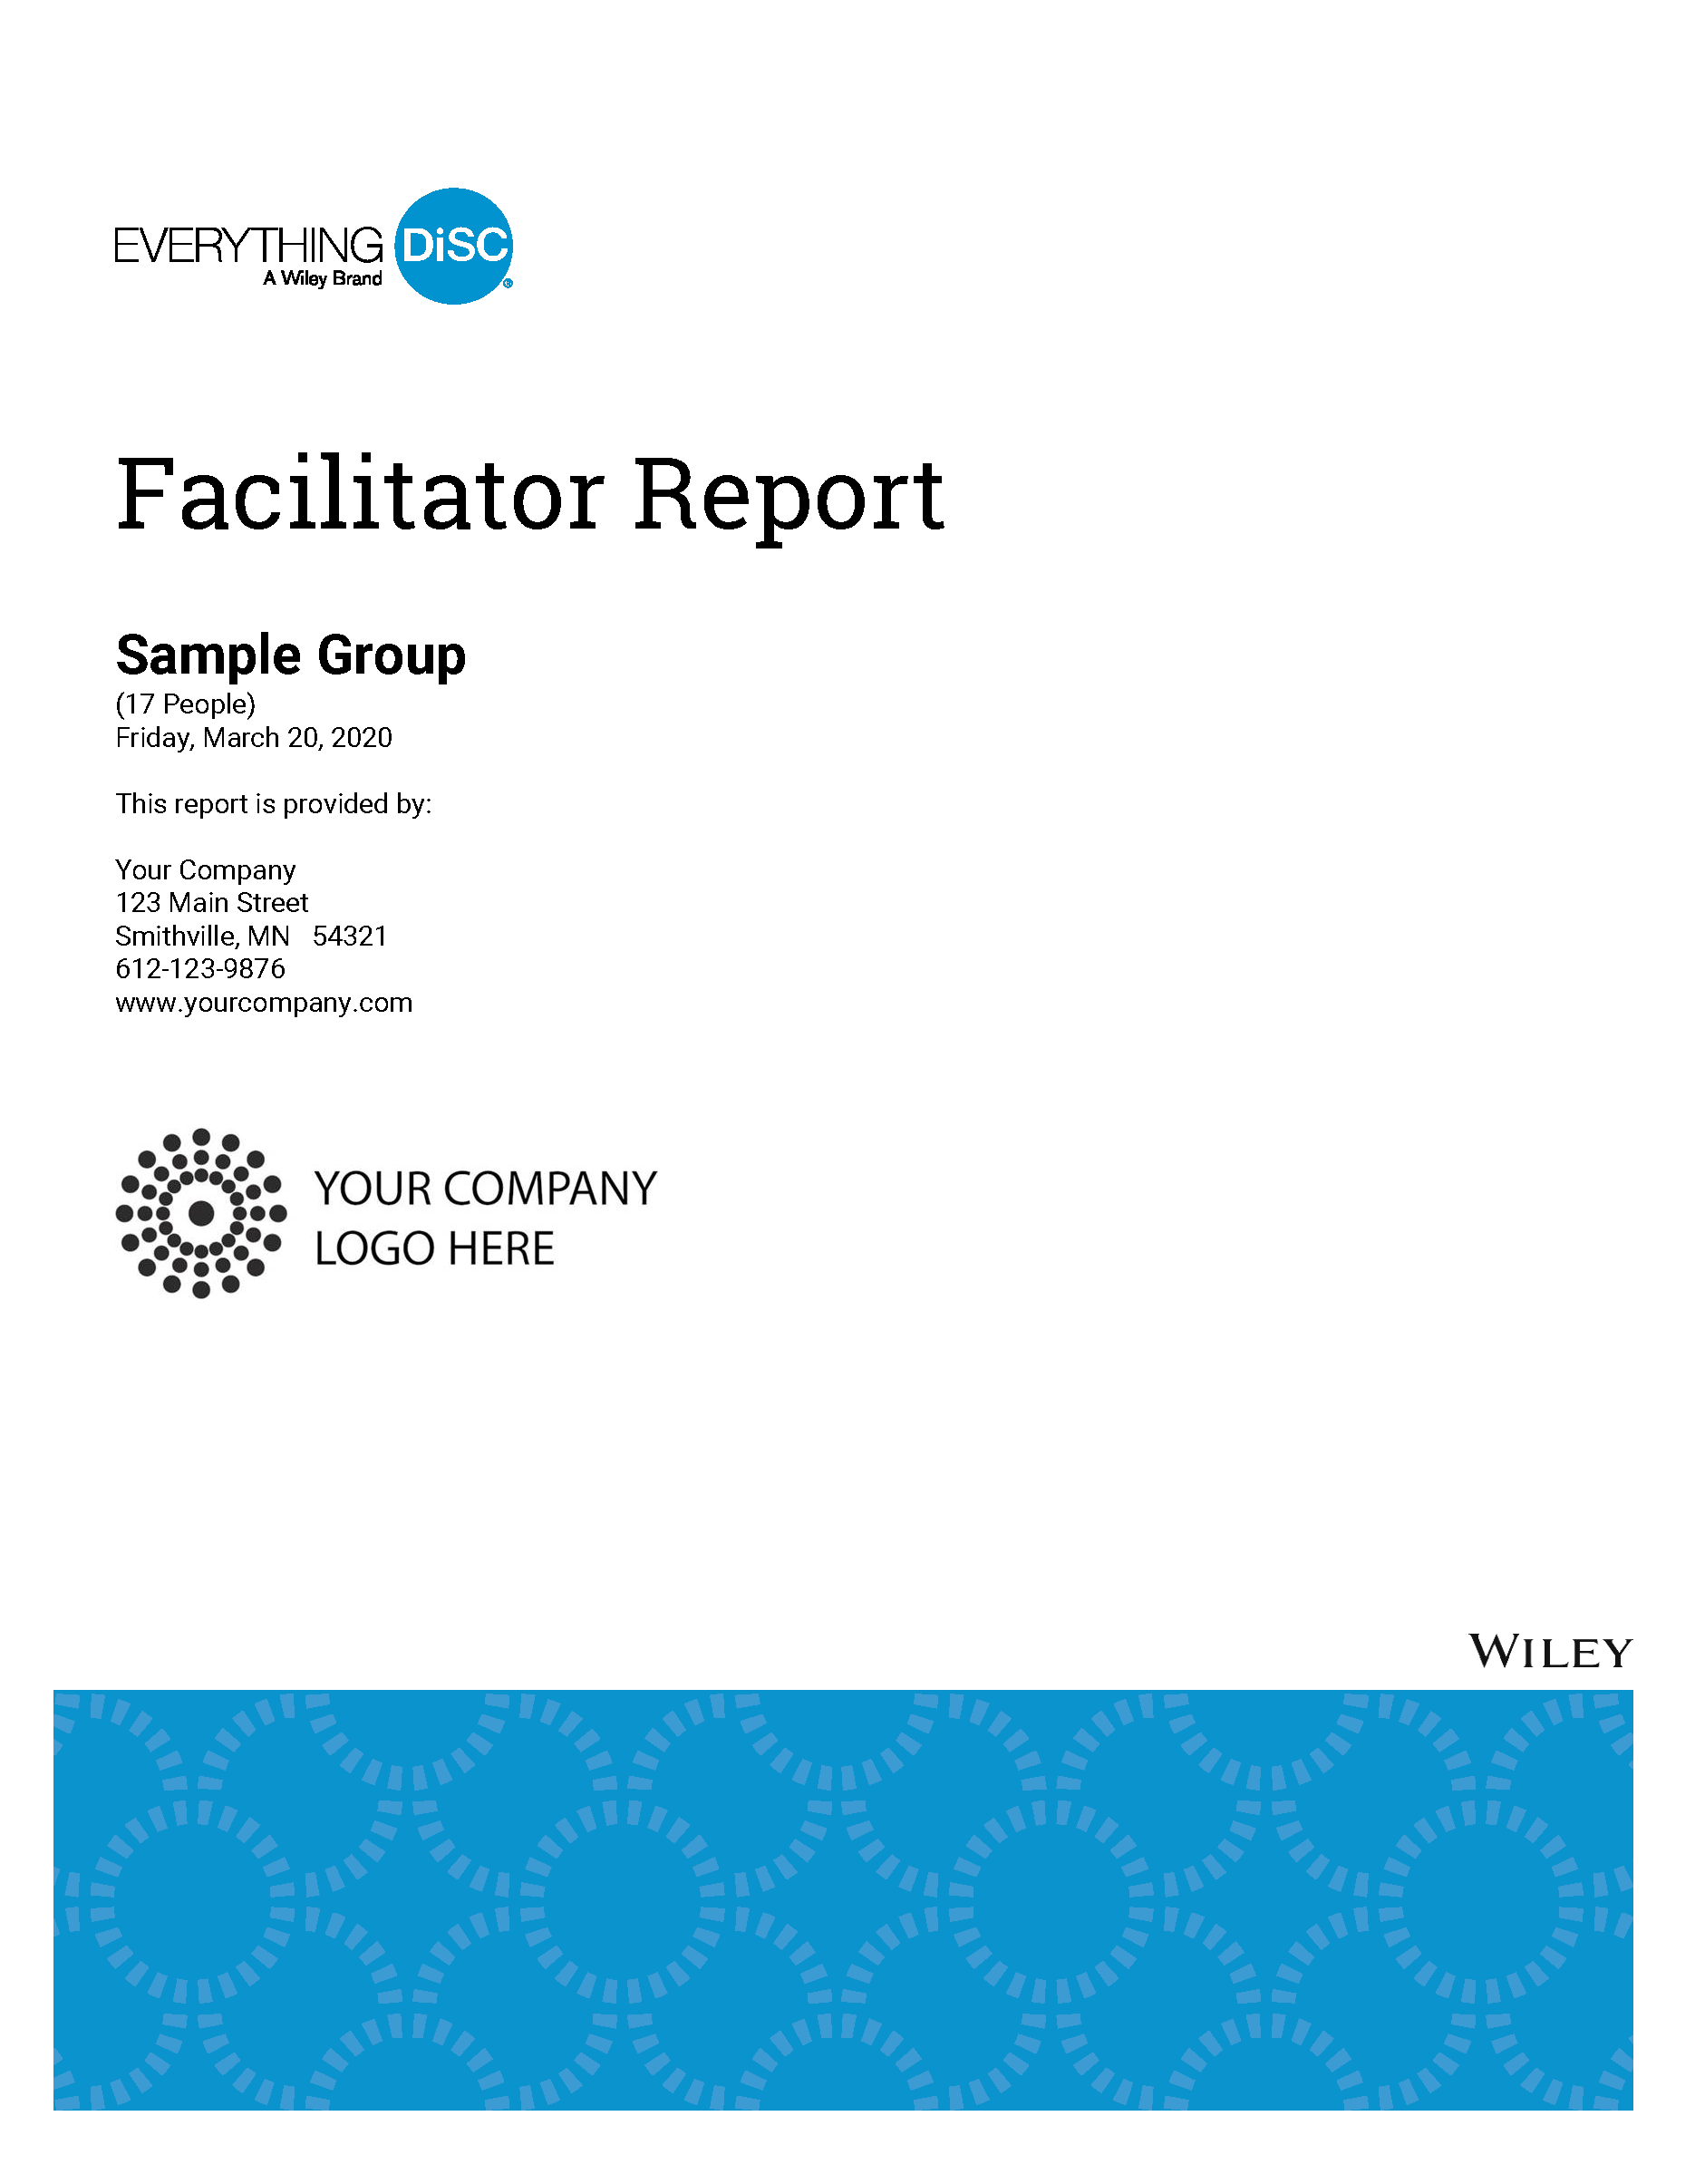 Everything DiSC Facilitor Report Cover May 2020